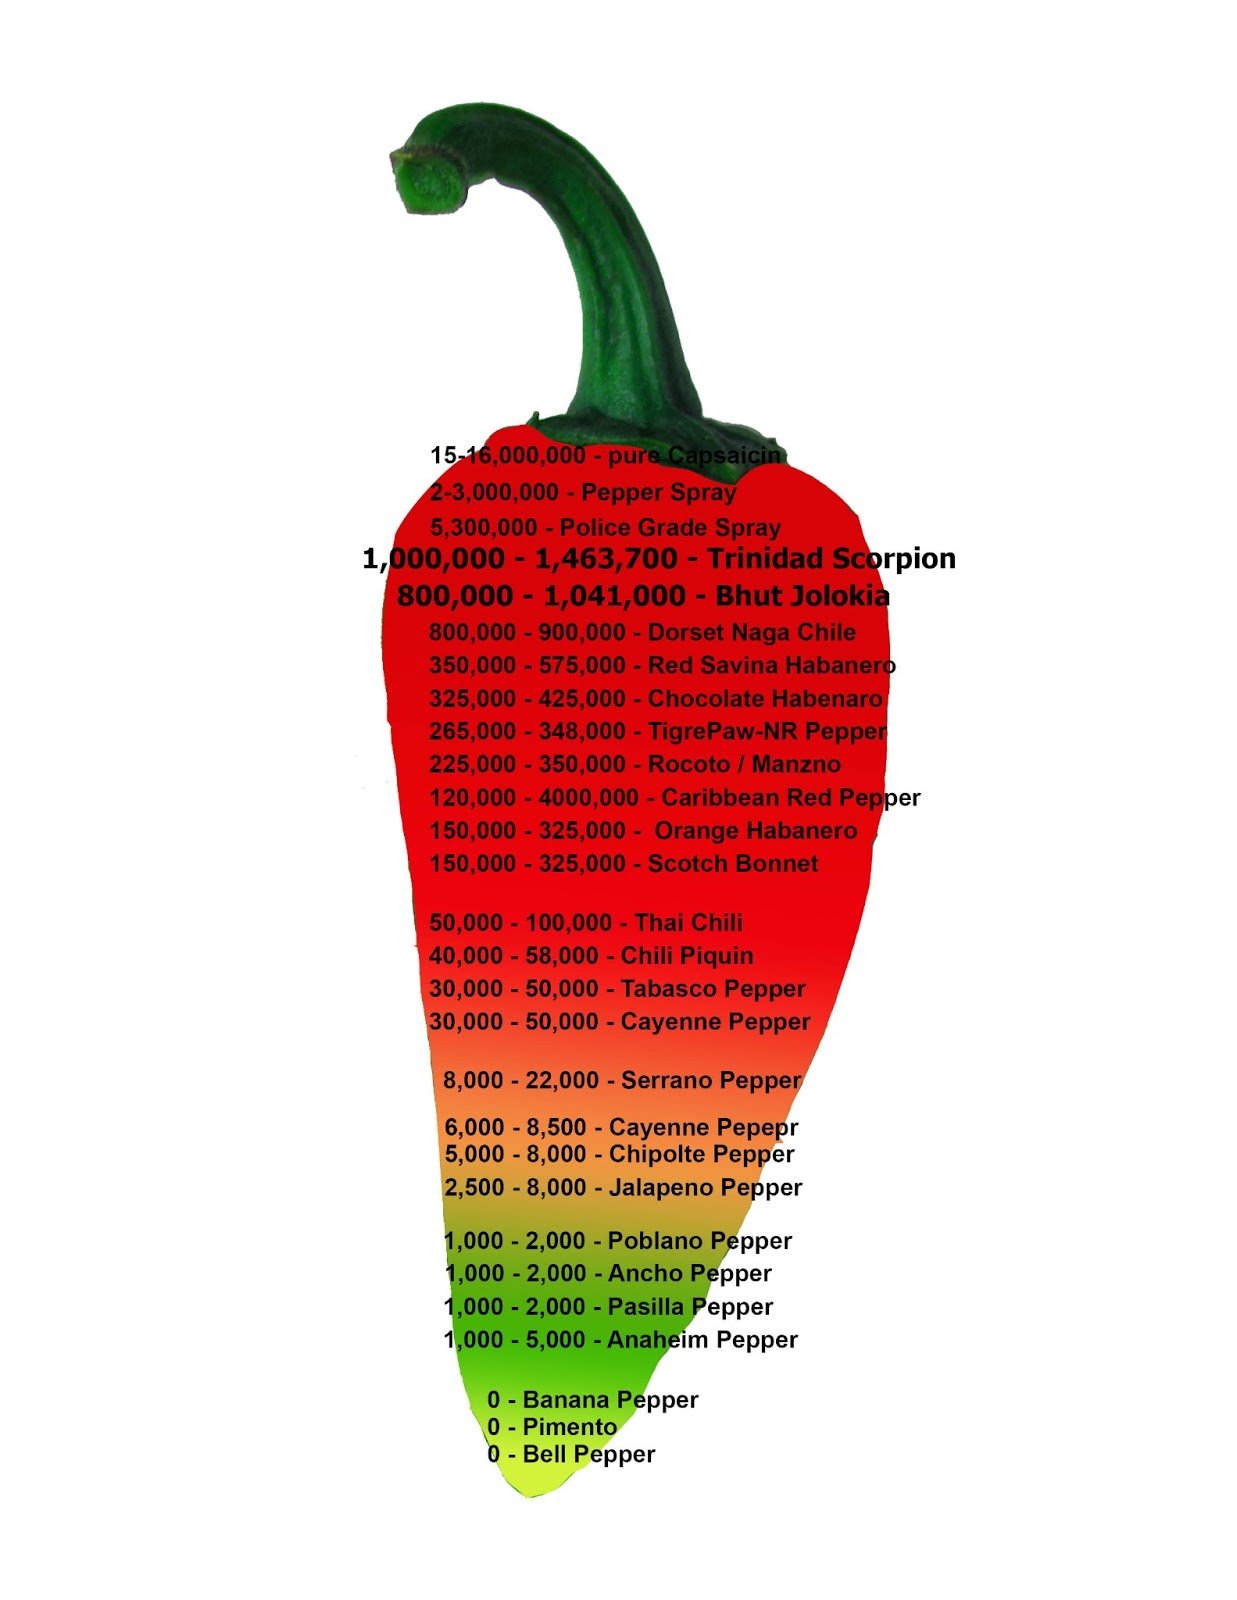 Ghost Chili Scoville Chart